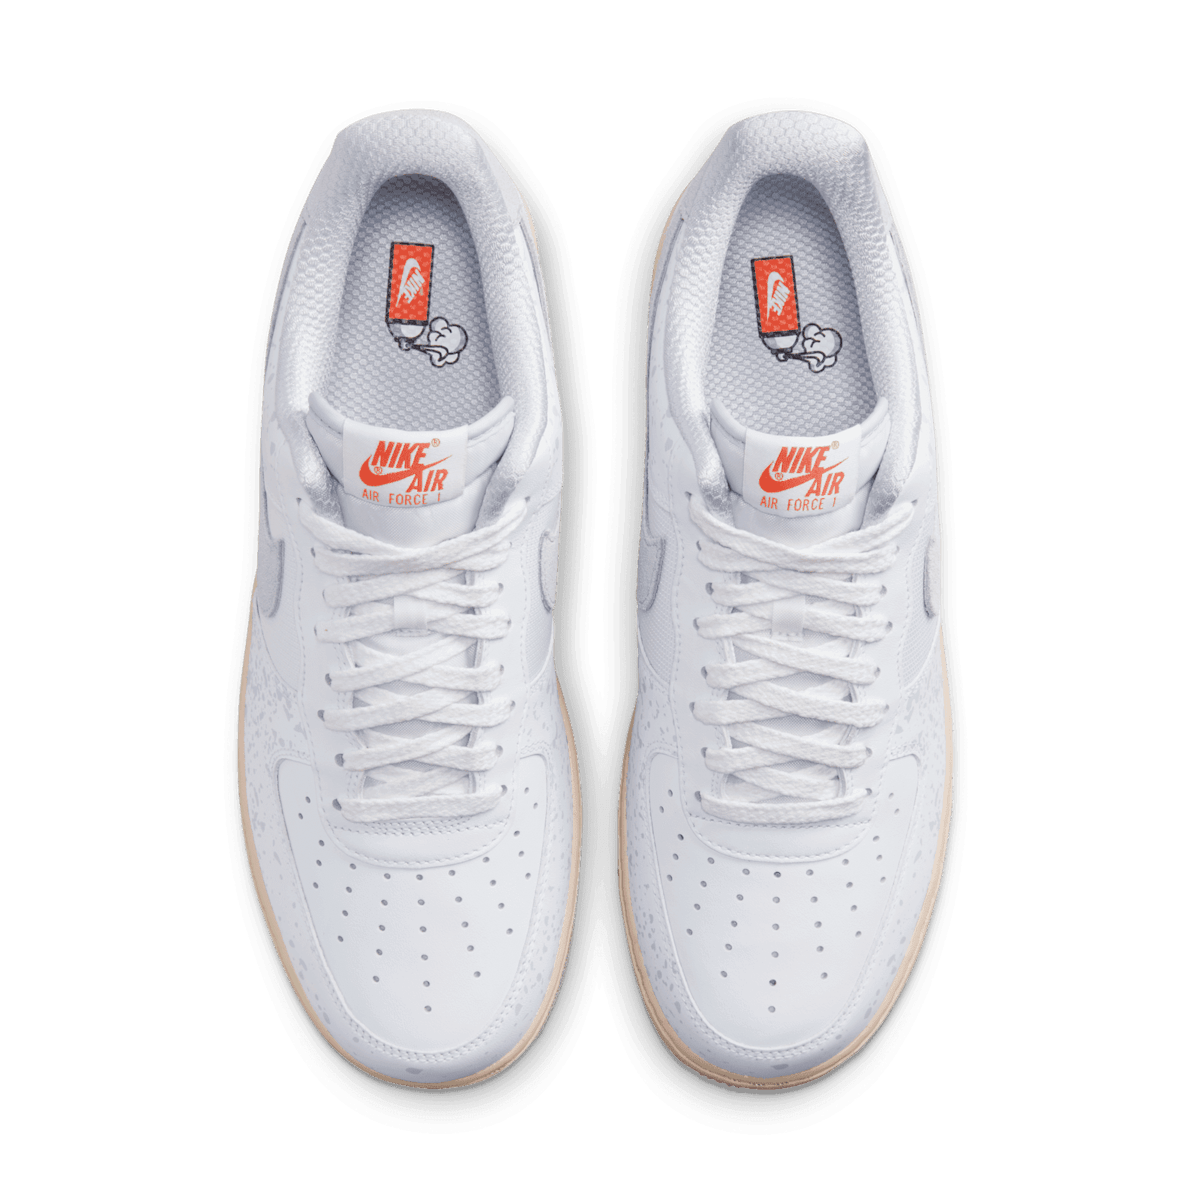 Nike Air Force 1 Low Paint Splatter Grey Angle 1